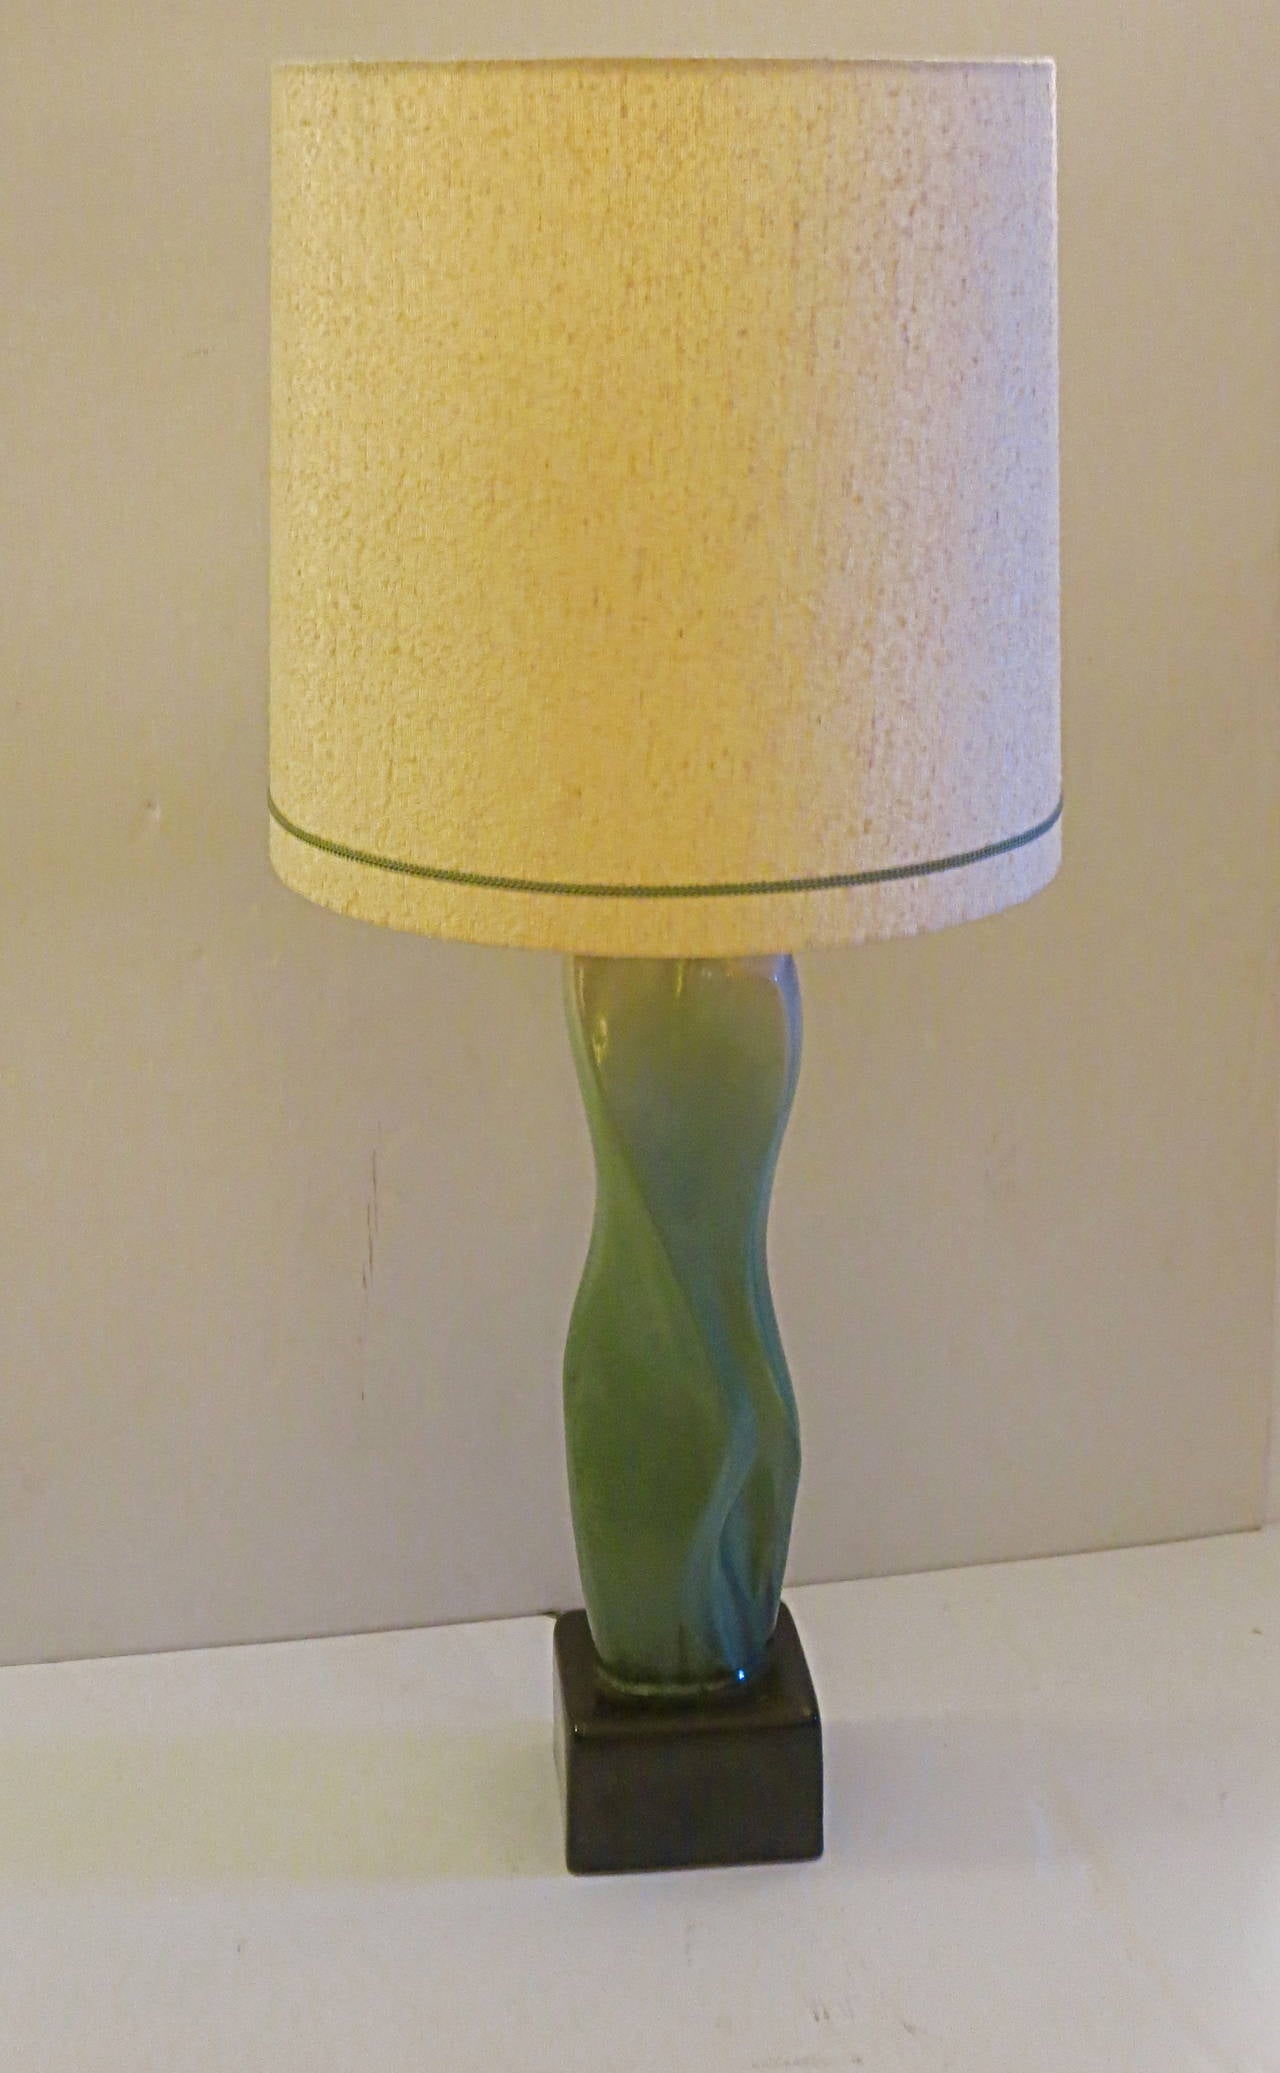 Striking tall nude female torso all one piece ceramic pottery , circa 1950s beautiful glaze , 3 way switch and milk glass shade , with its original lamp shade in good condition outside with some crackig on the inside plastic due to age , no chips or